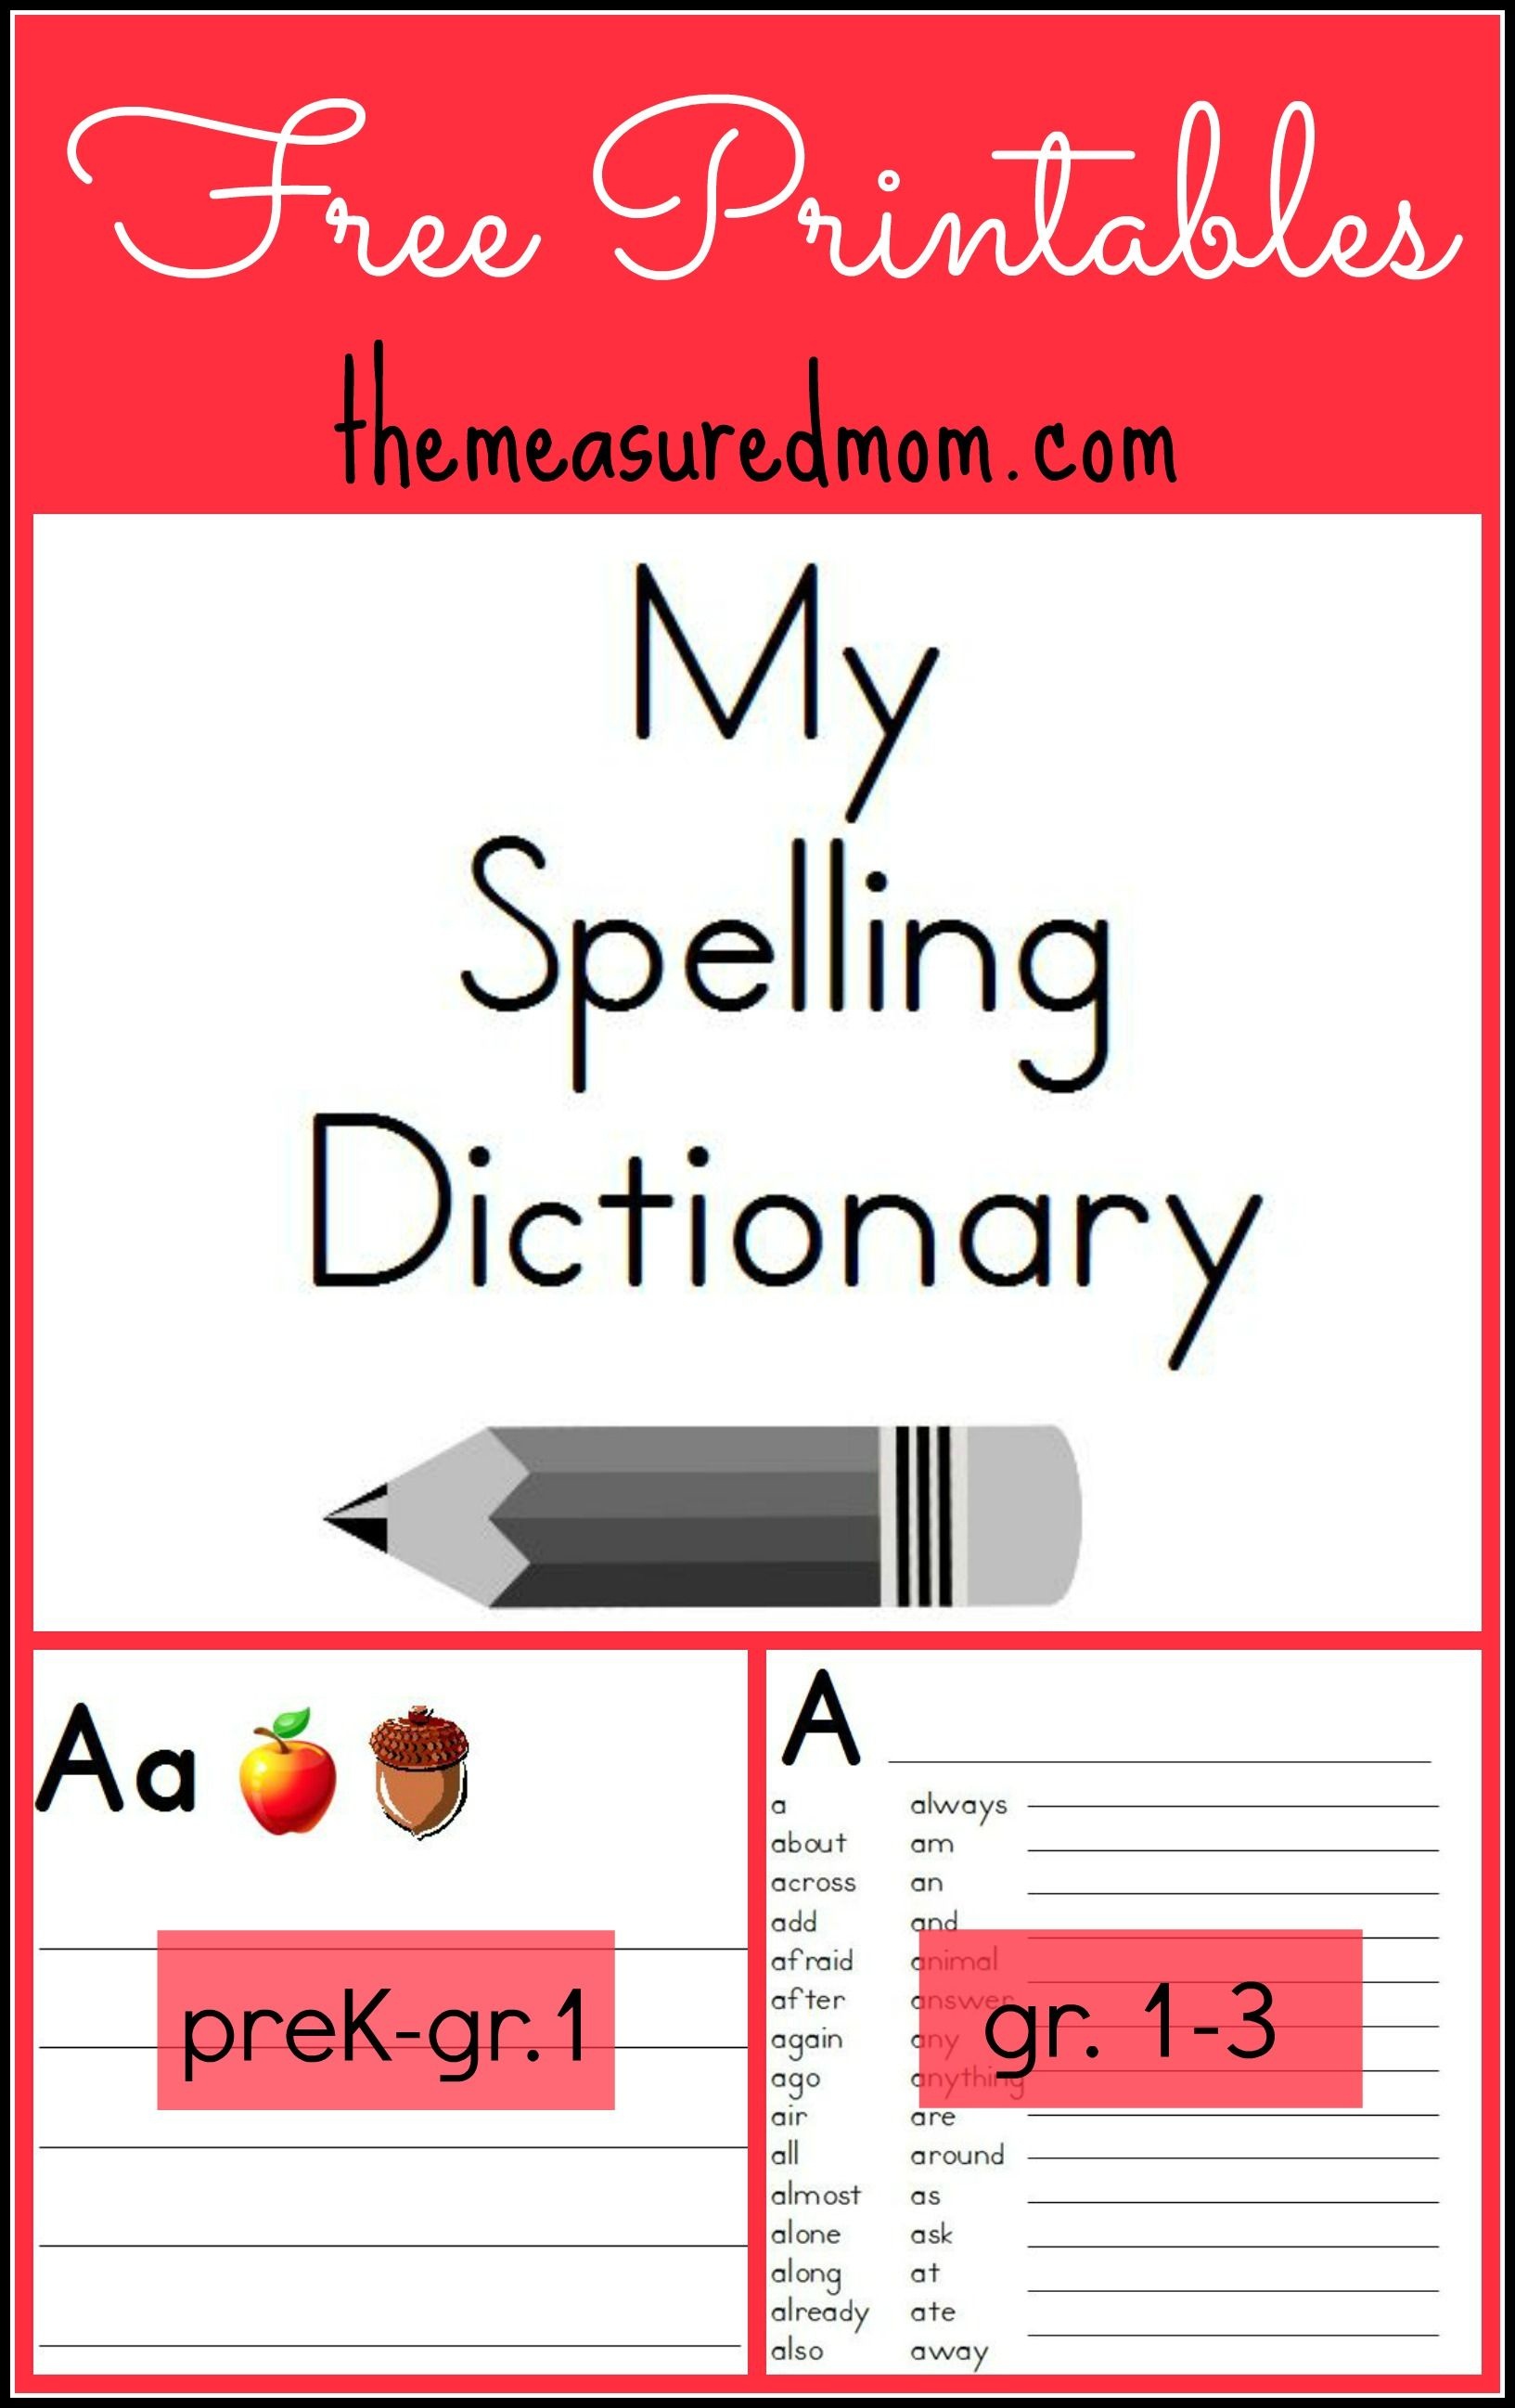 Printable Spelling Dictionary For Kids | For My Students | Escuela - My Spelling Dictionary Printable Free